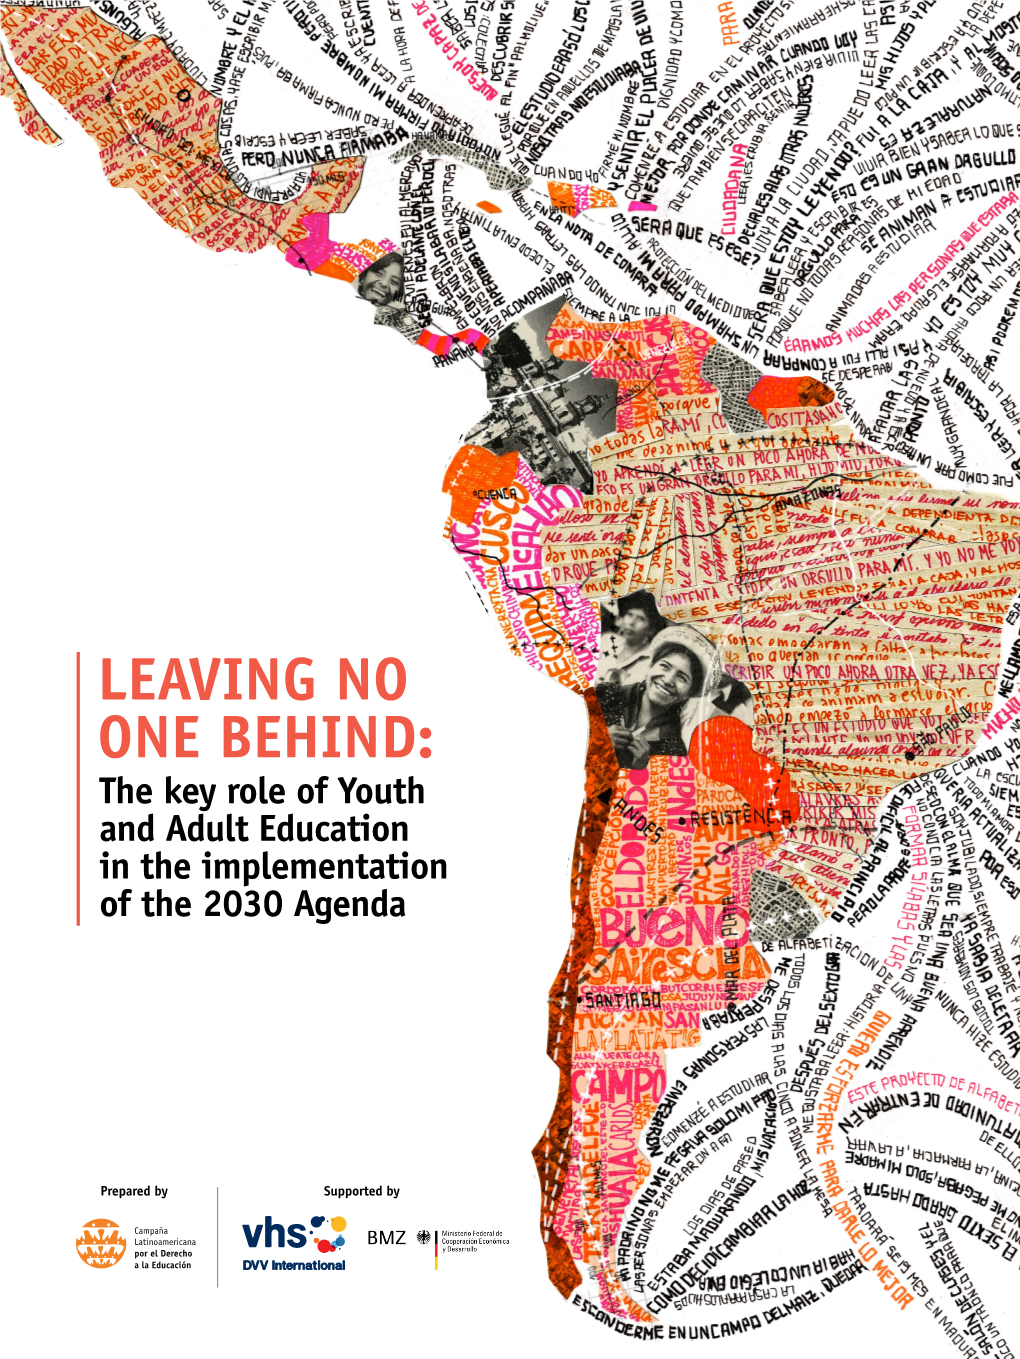 LEAVING NO ONE BEHIND: the Key Role of Youth and Adult Education in the Implementation of the 2030 Agenda